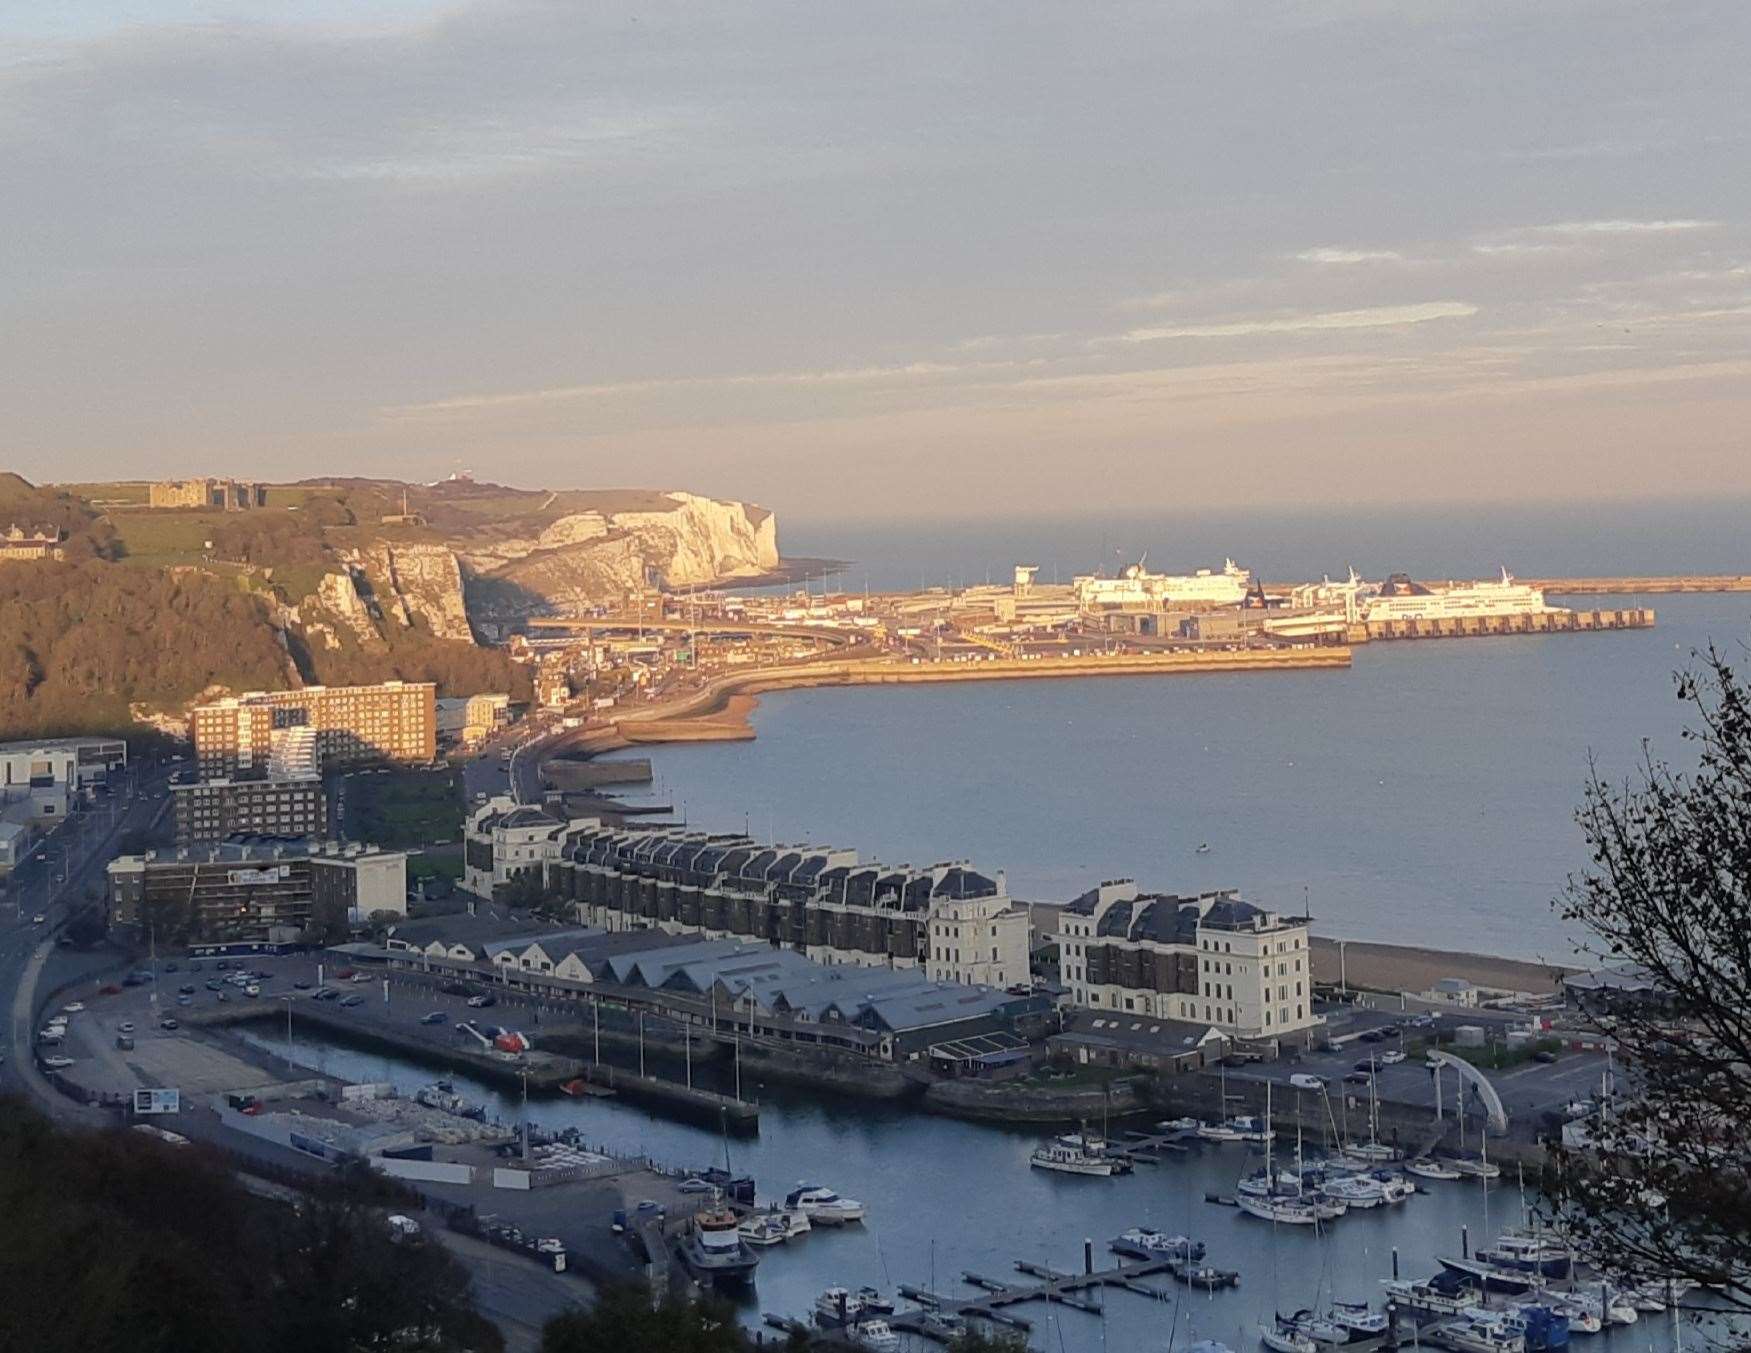 Migrants stopped at sea are usually brought to Dover for assessment